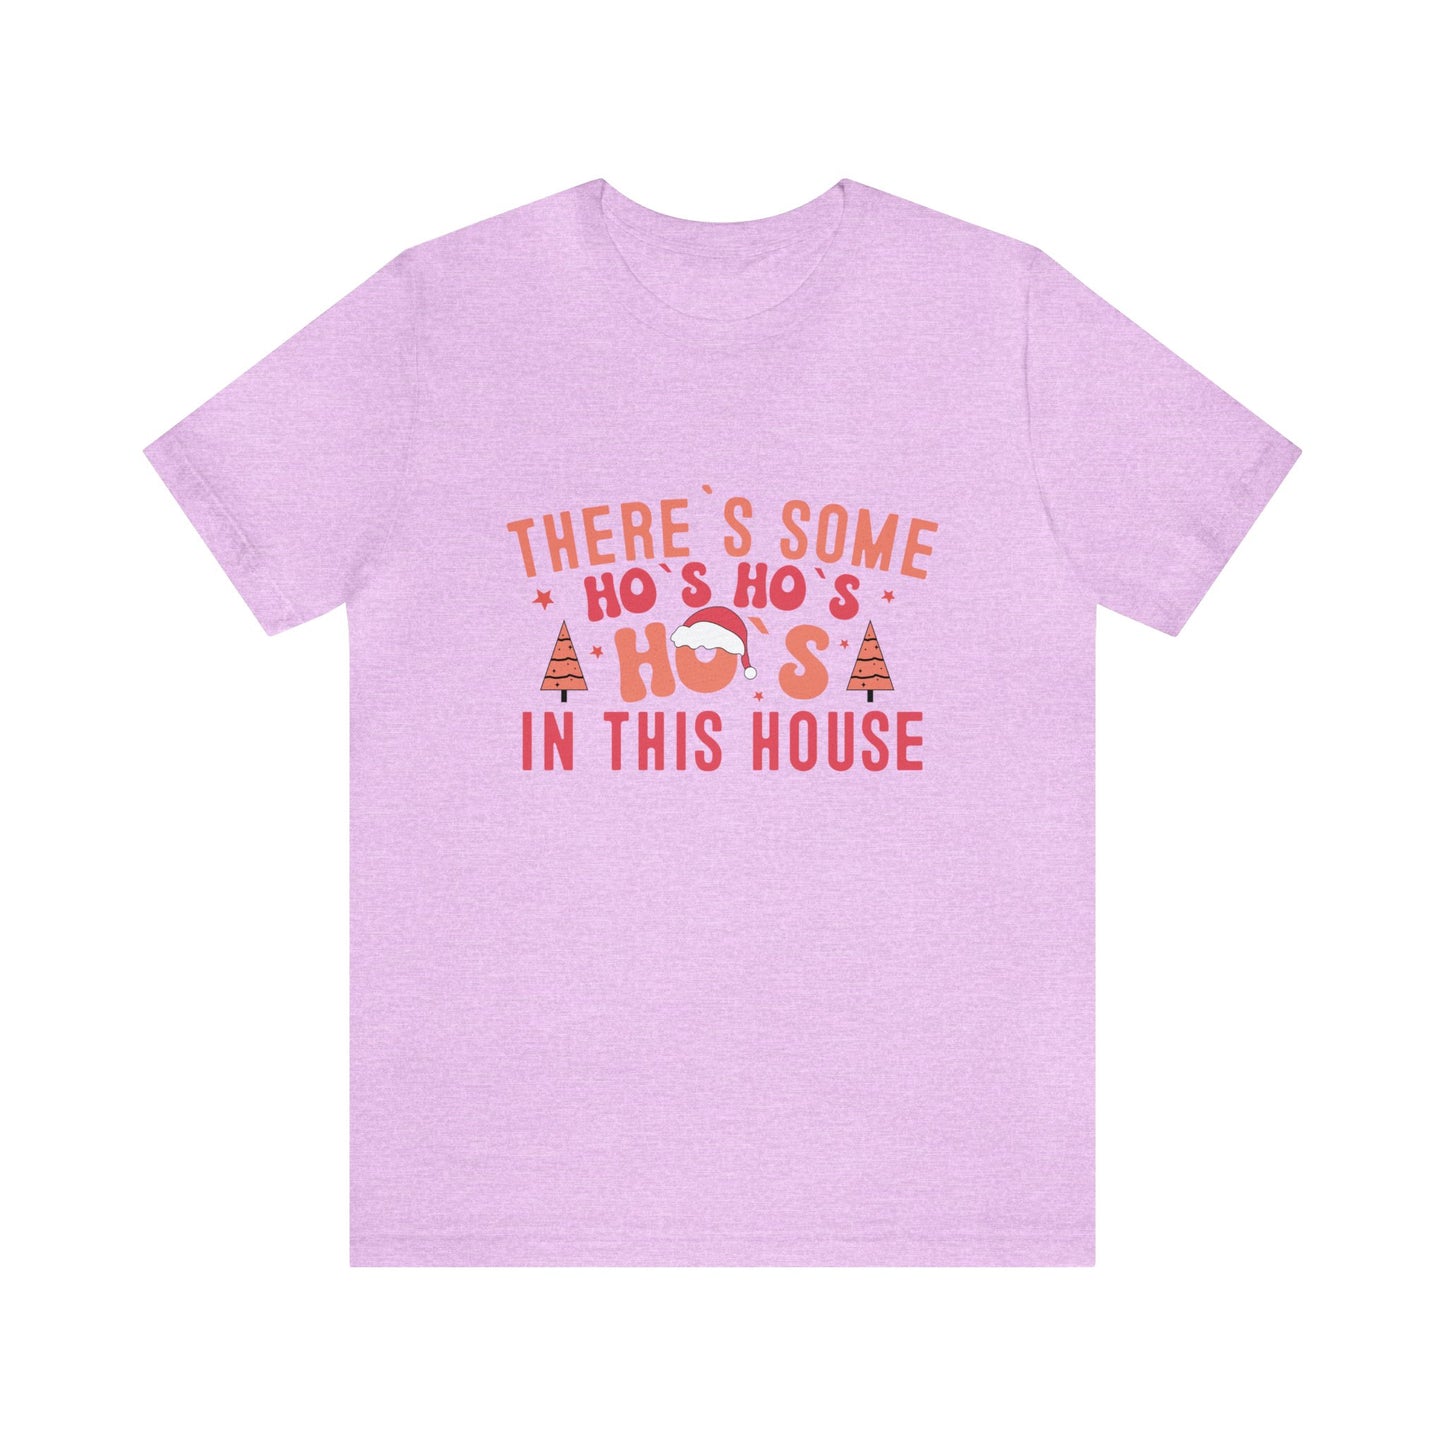 There's some ho ho hos in the house Women's Funny Christmas Short Sleeve Shirt